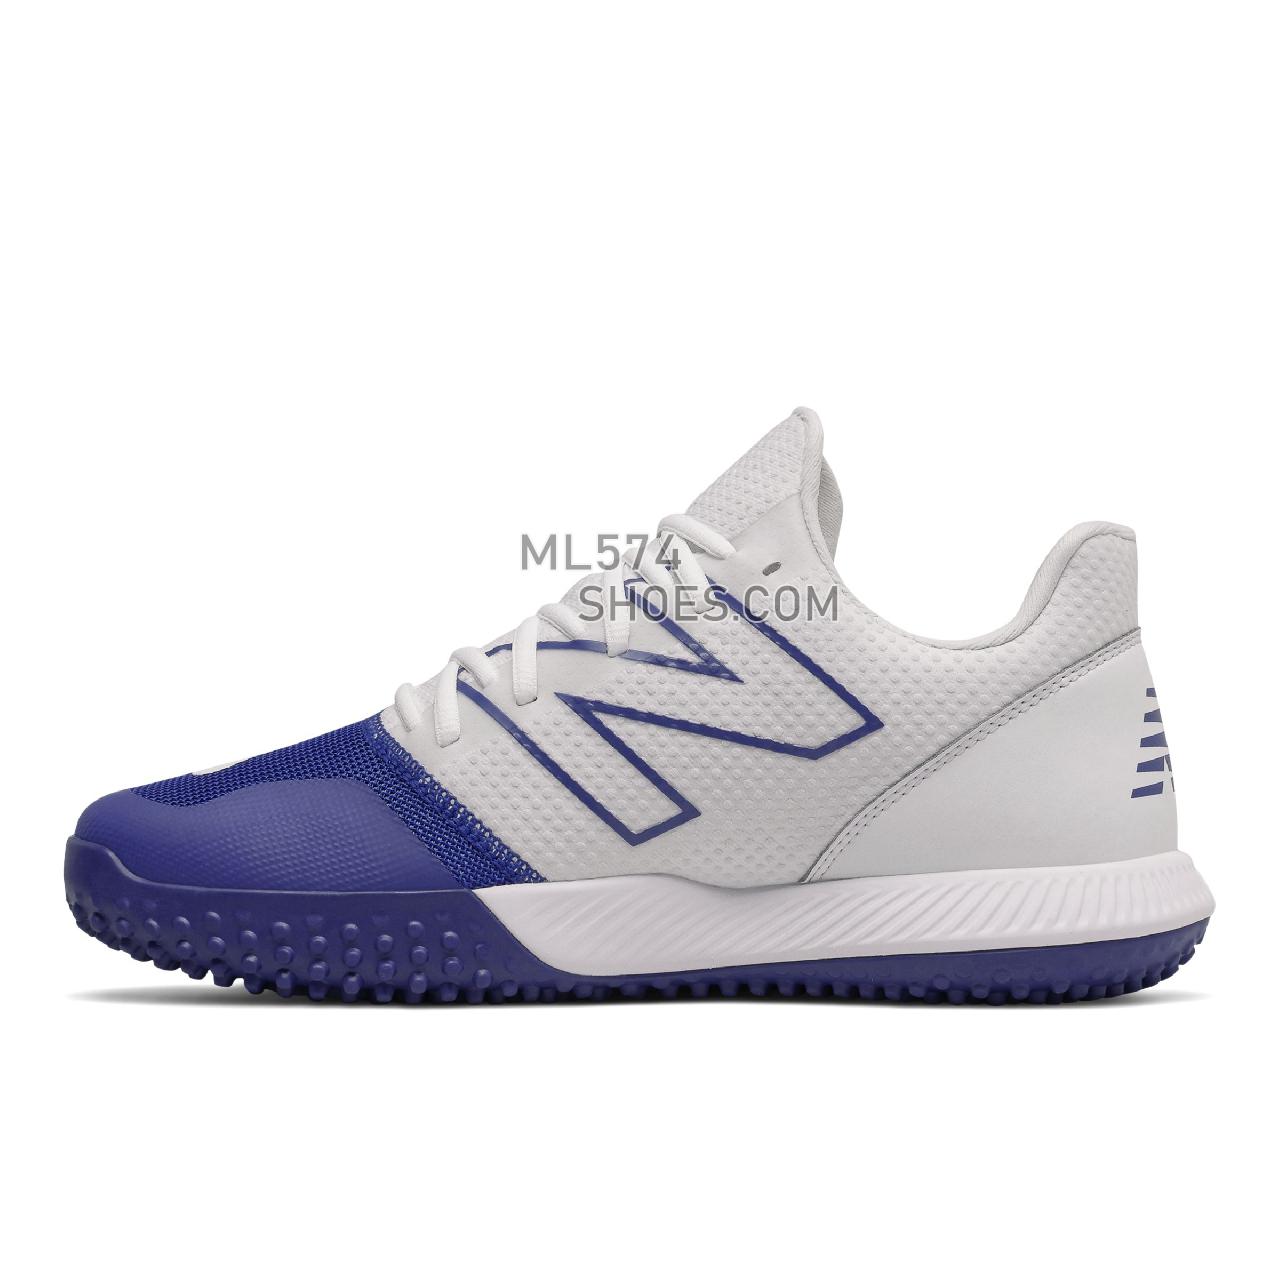 New Balance FuelCell 4040 v6 Turf Trainer - Men's Baseball Turf - Team Royal with White - T4040TB6